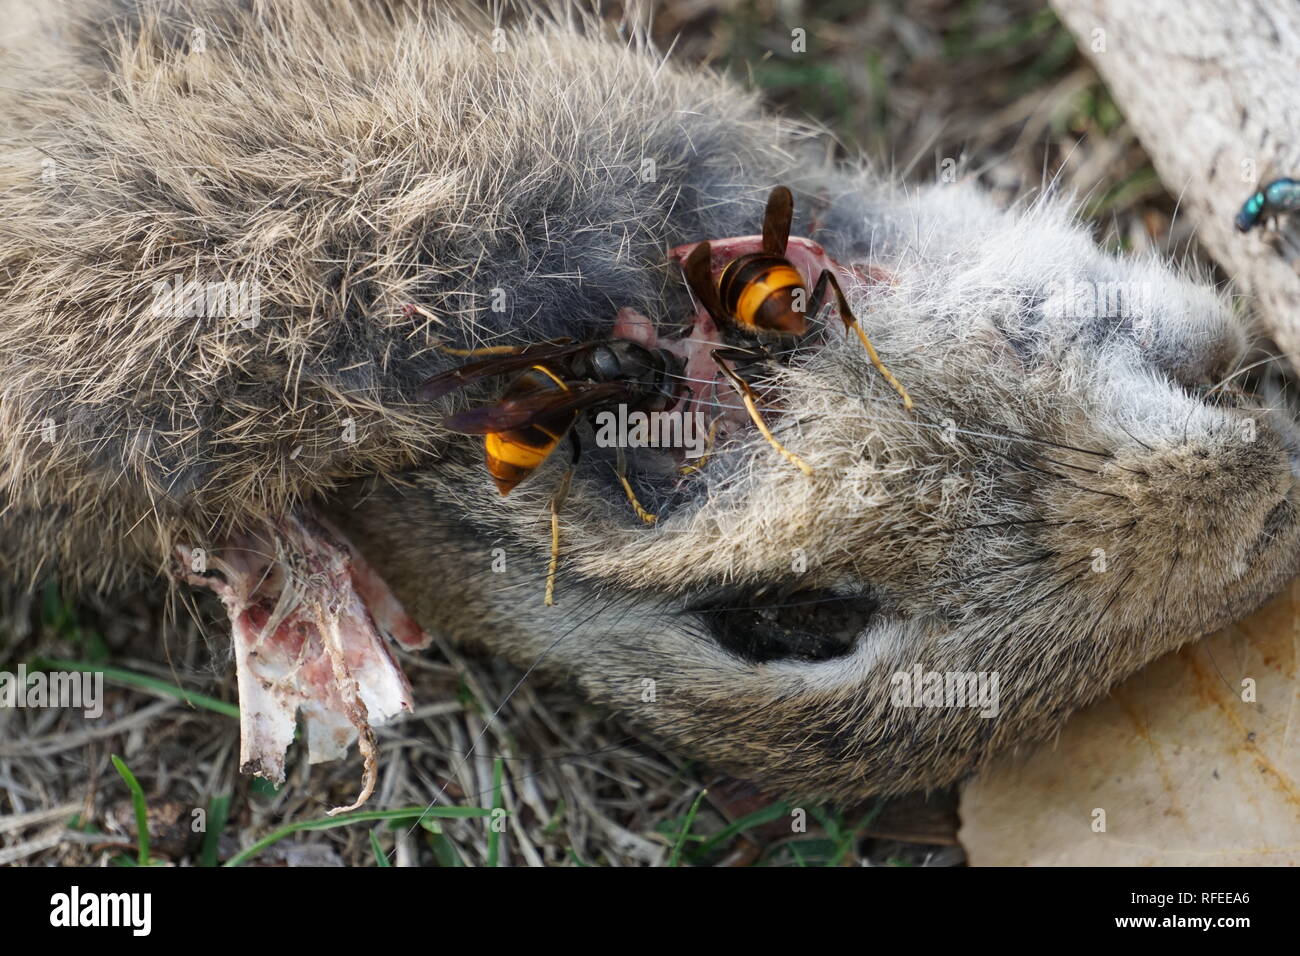 Close up of two yellow jackets eating the flesh of a dead rabbit in the country Stock Photo